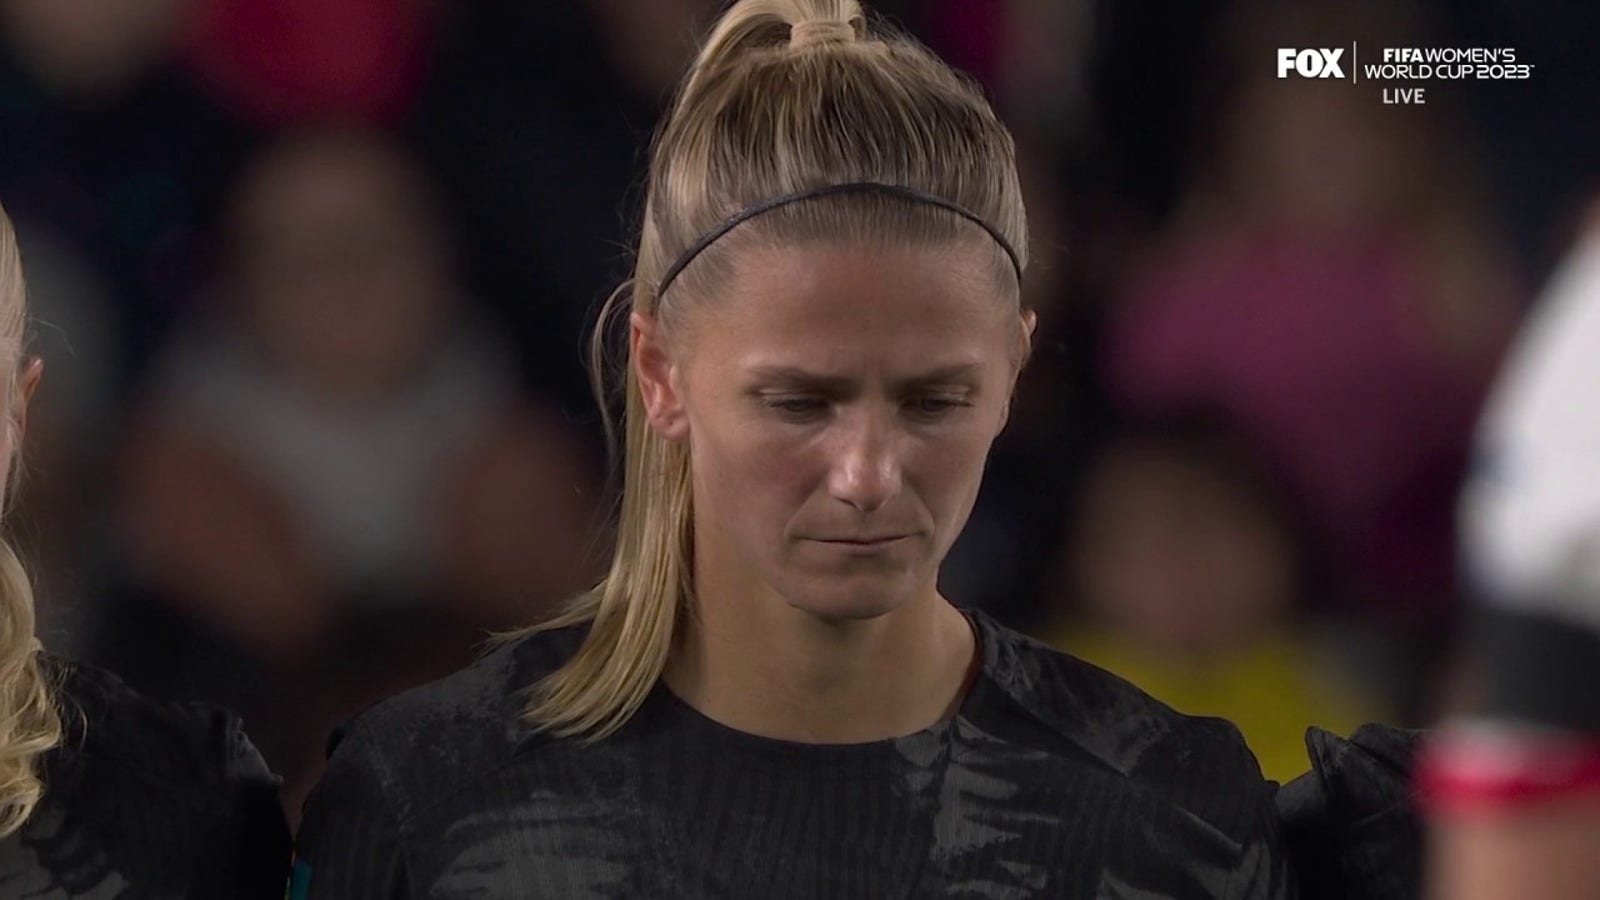 New Zealand, Norway share pregame moment of silence